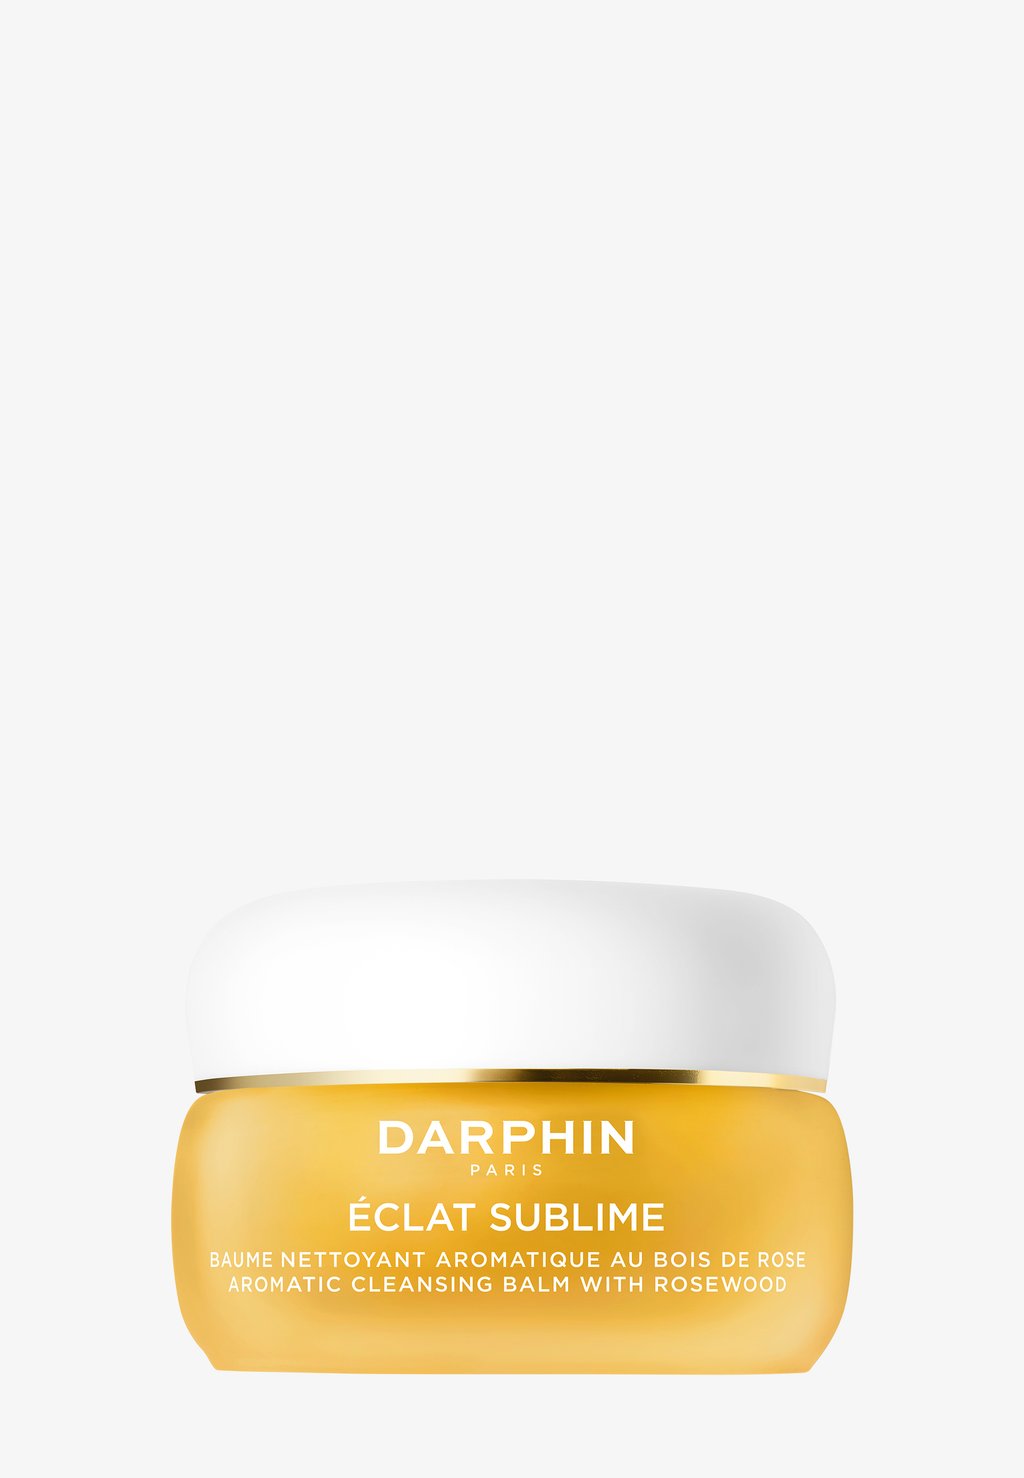 darphin eclat sublime aromatic cleansing balm with rosewood Очищающее средство Éclat Sublime Aromatic Cleansing Balm Darphin